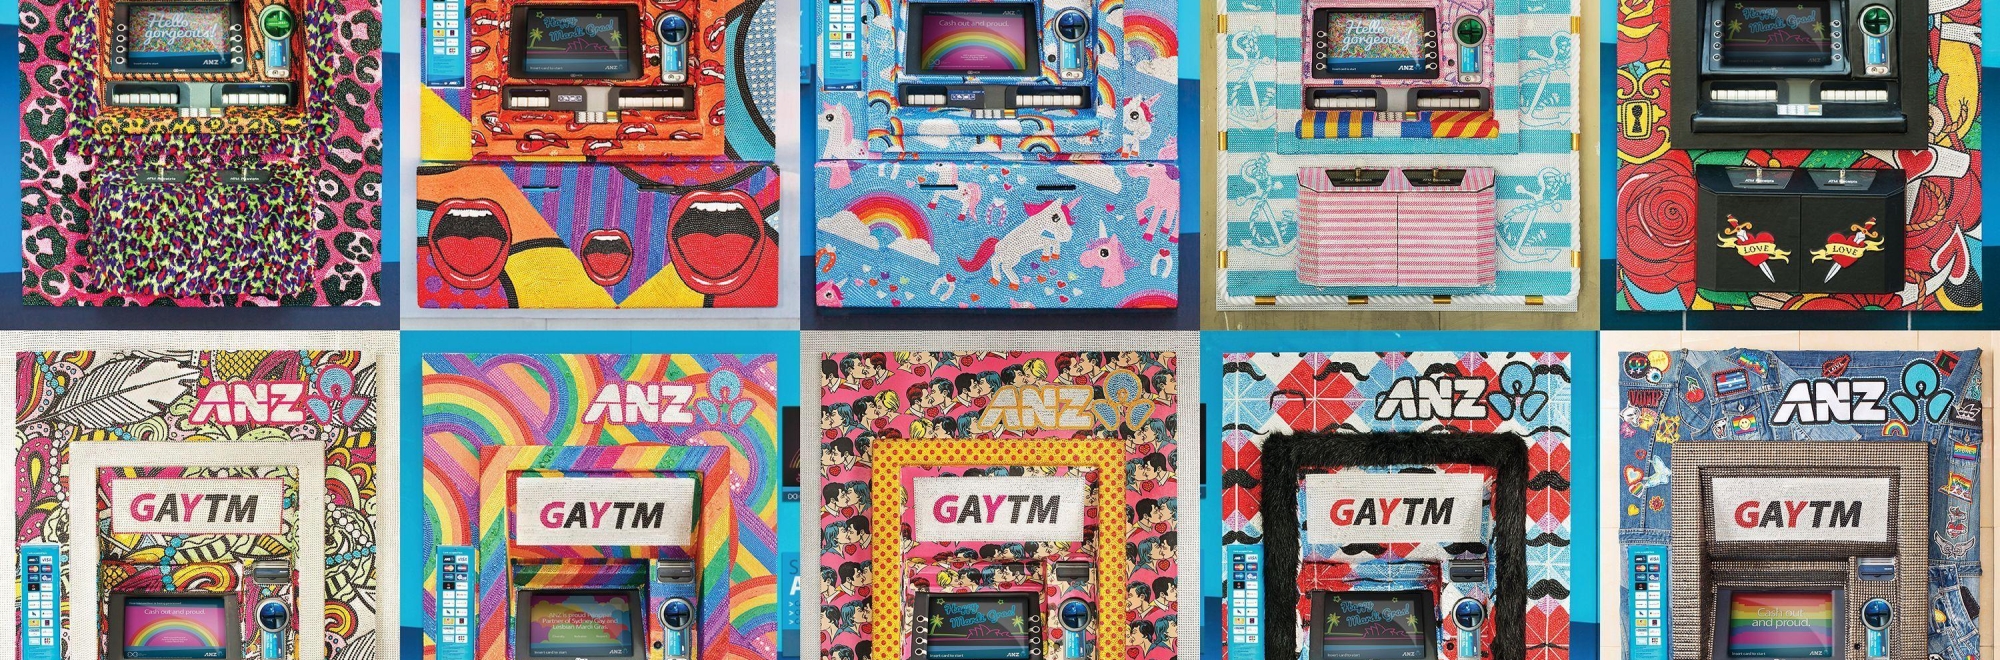 How ANZ's pride campaign celebrates diversity and inclusion